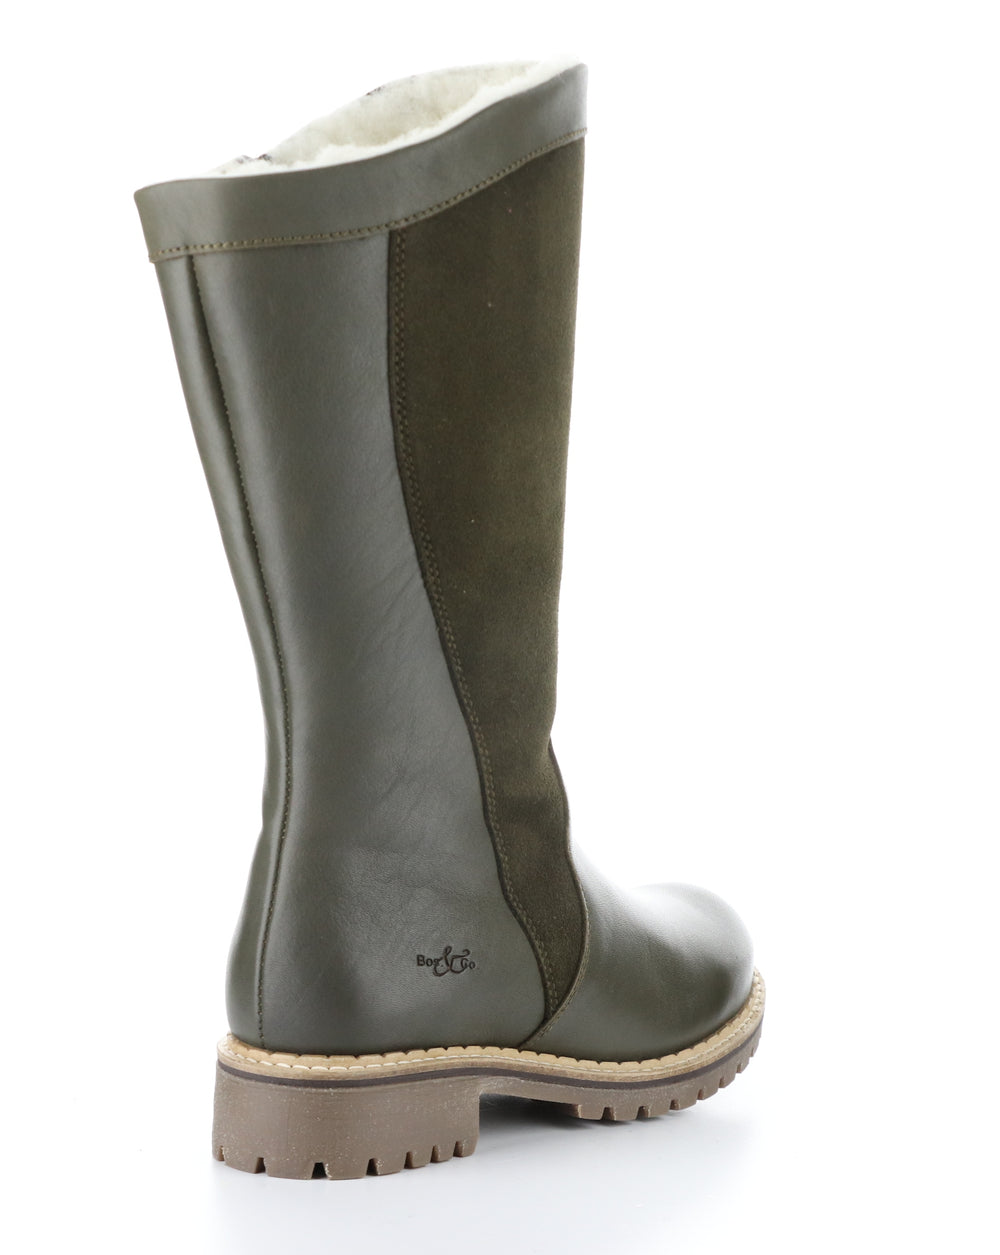 HENRY OLIVE Round Toe Boots